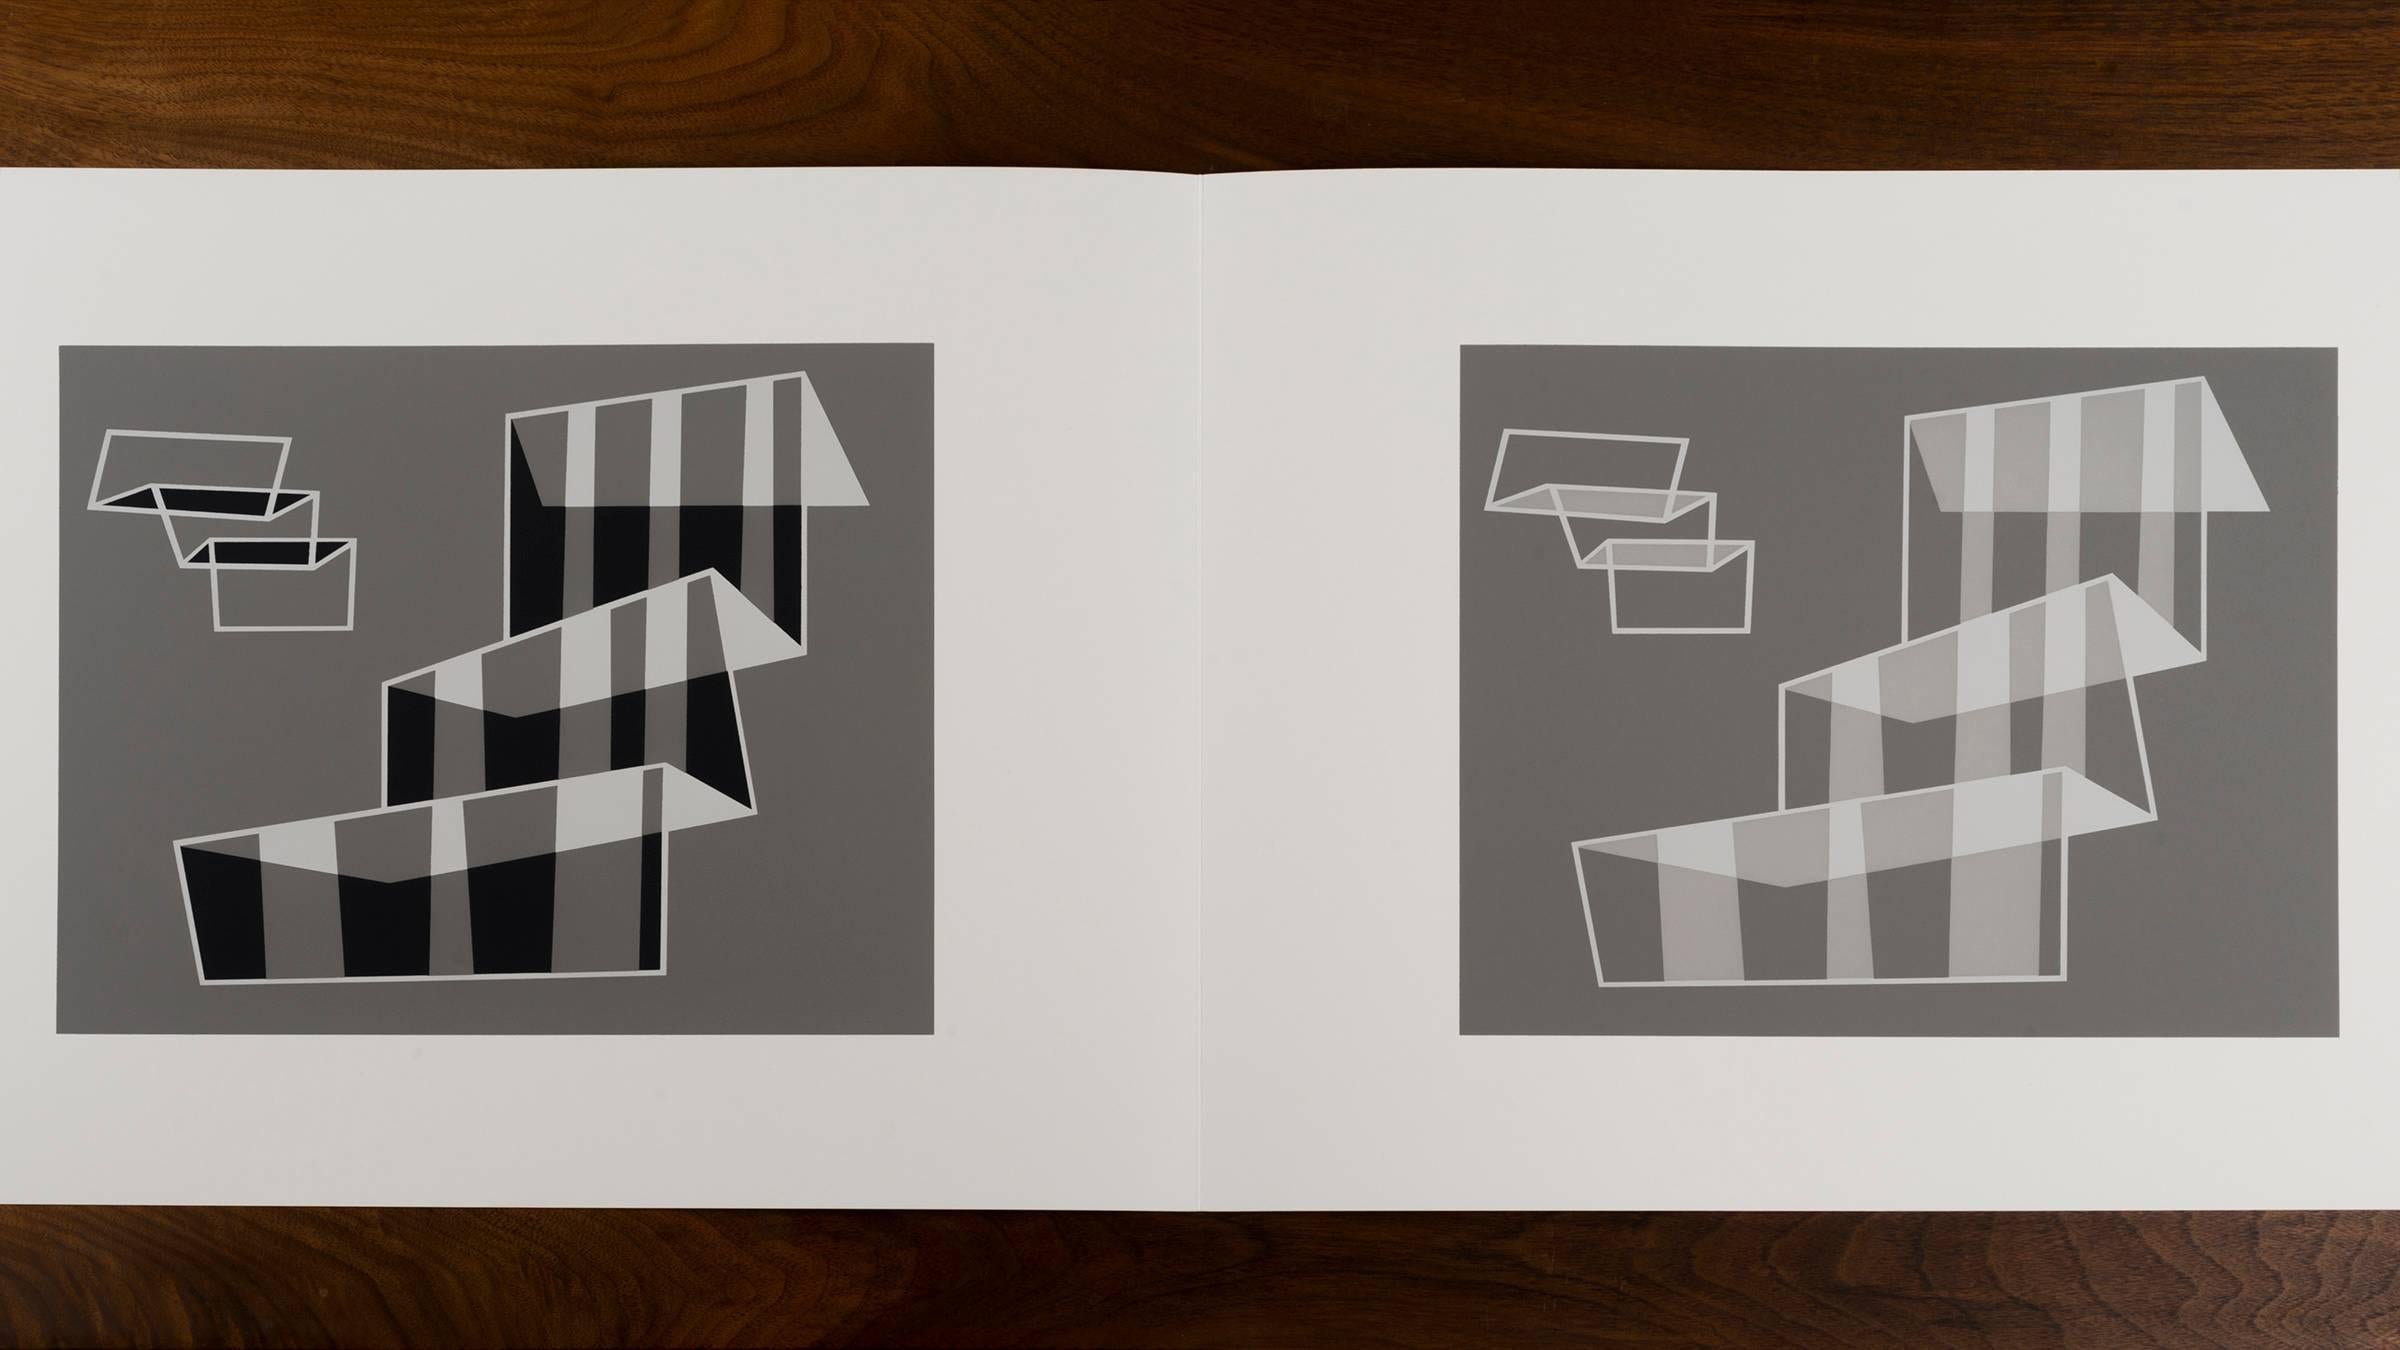 Josef Albers Formulations - Articulations I & II
Edition 974/ 1000
1972 screen-print on paper
Embossed with Josef Albers initials, portfolio and folder number. This work is published by Harry N. Abrams and Ives-Sillman.
This work has never been